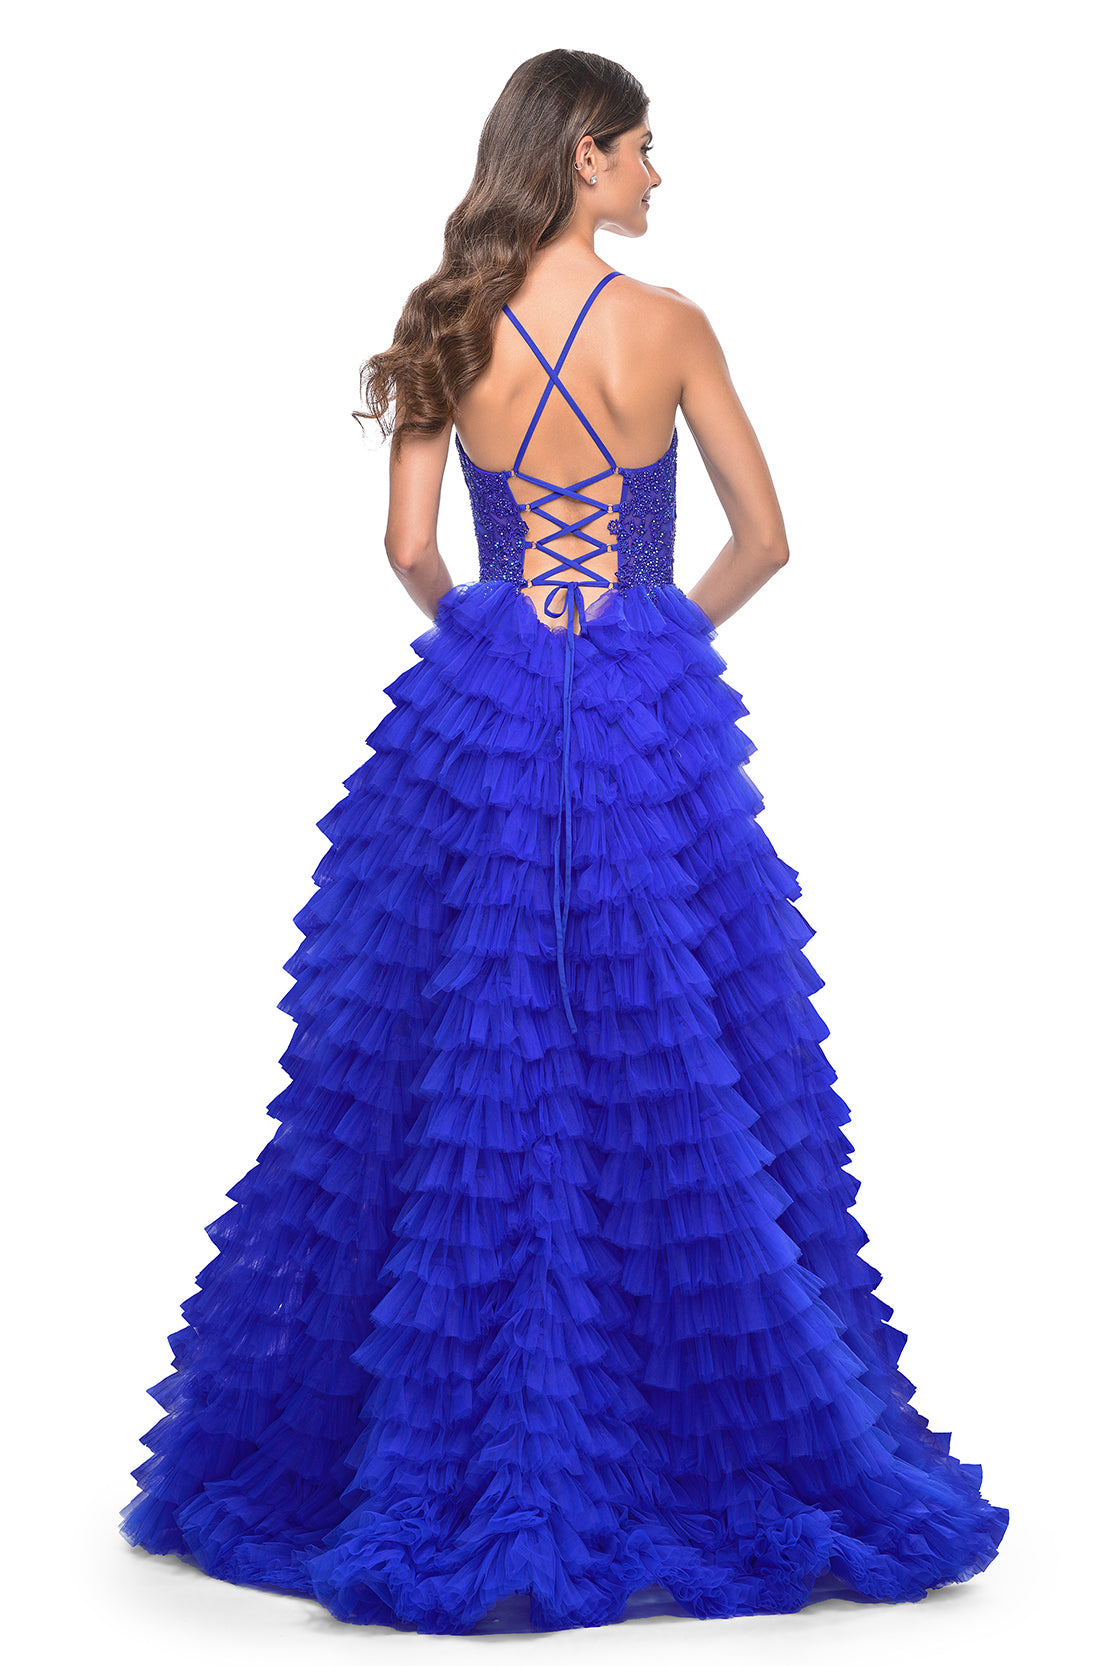 La Femme 32128 Dreamy Ruffle Tulle Tiered Prom Dress - A captivating prom dress featuring a dreamy ruffle tulle tiered skirt, high slit, and intricate lace applique details for an enchanting and sophisticated look. The model is wearing royal blue.